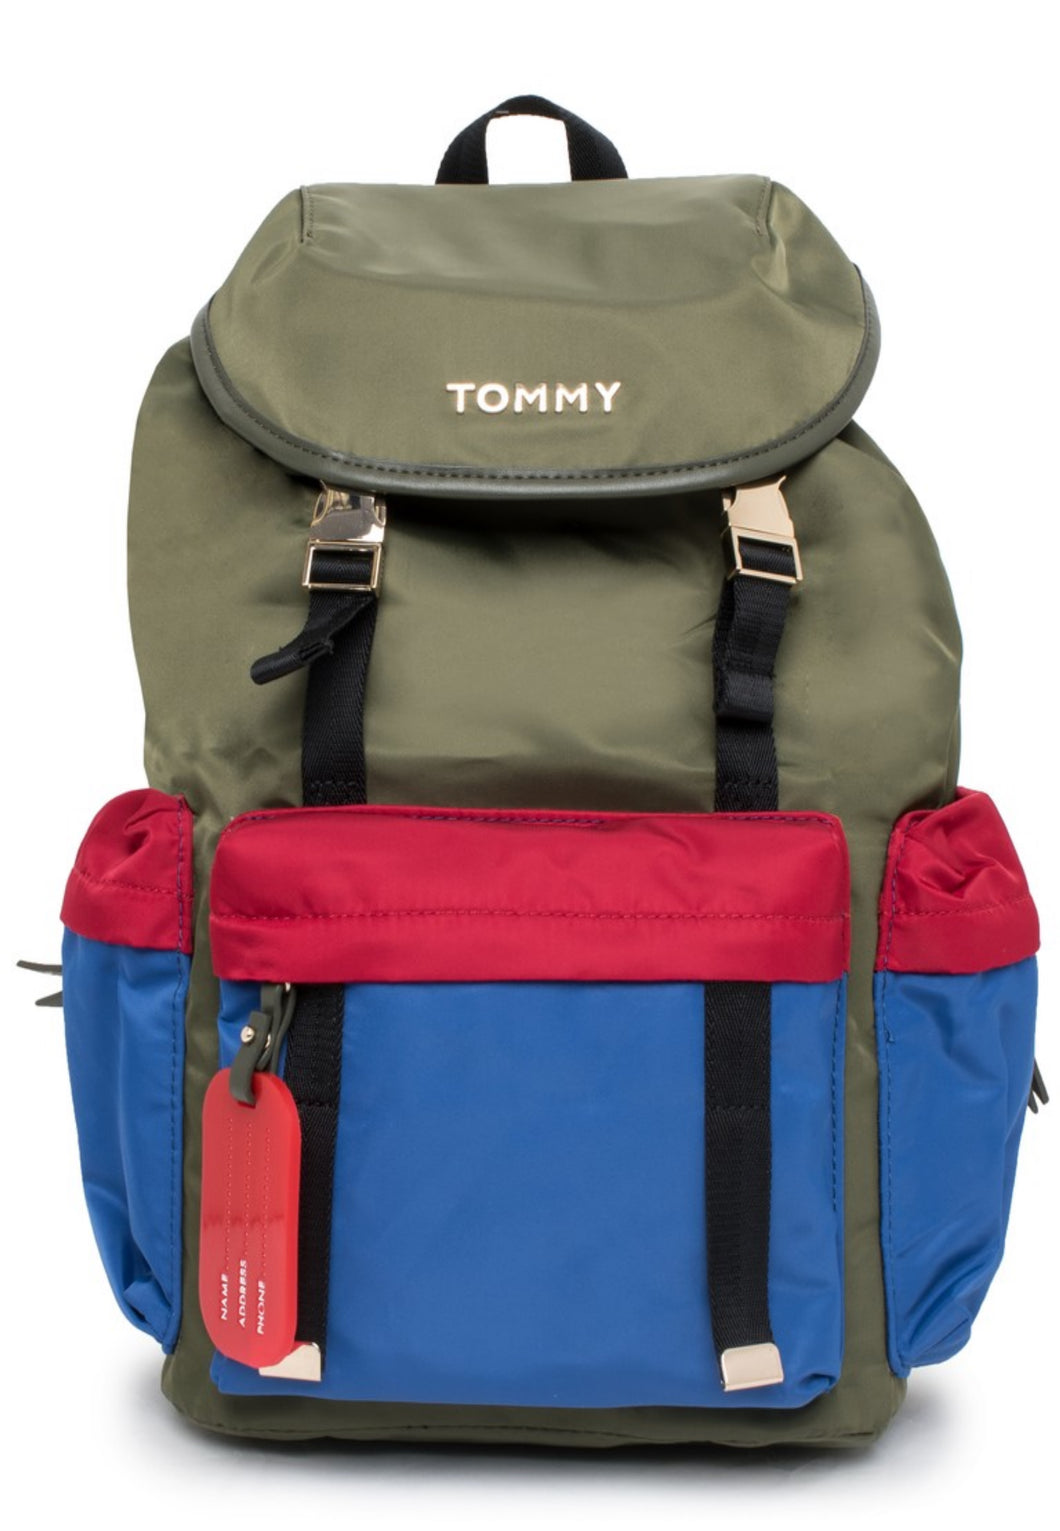 ON THE MOVE BACKPACK - Tagesrucksack